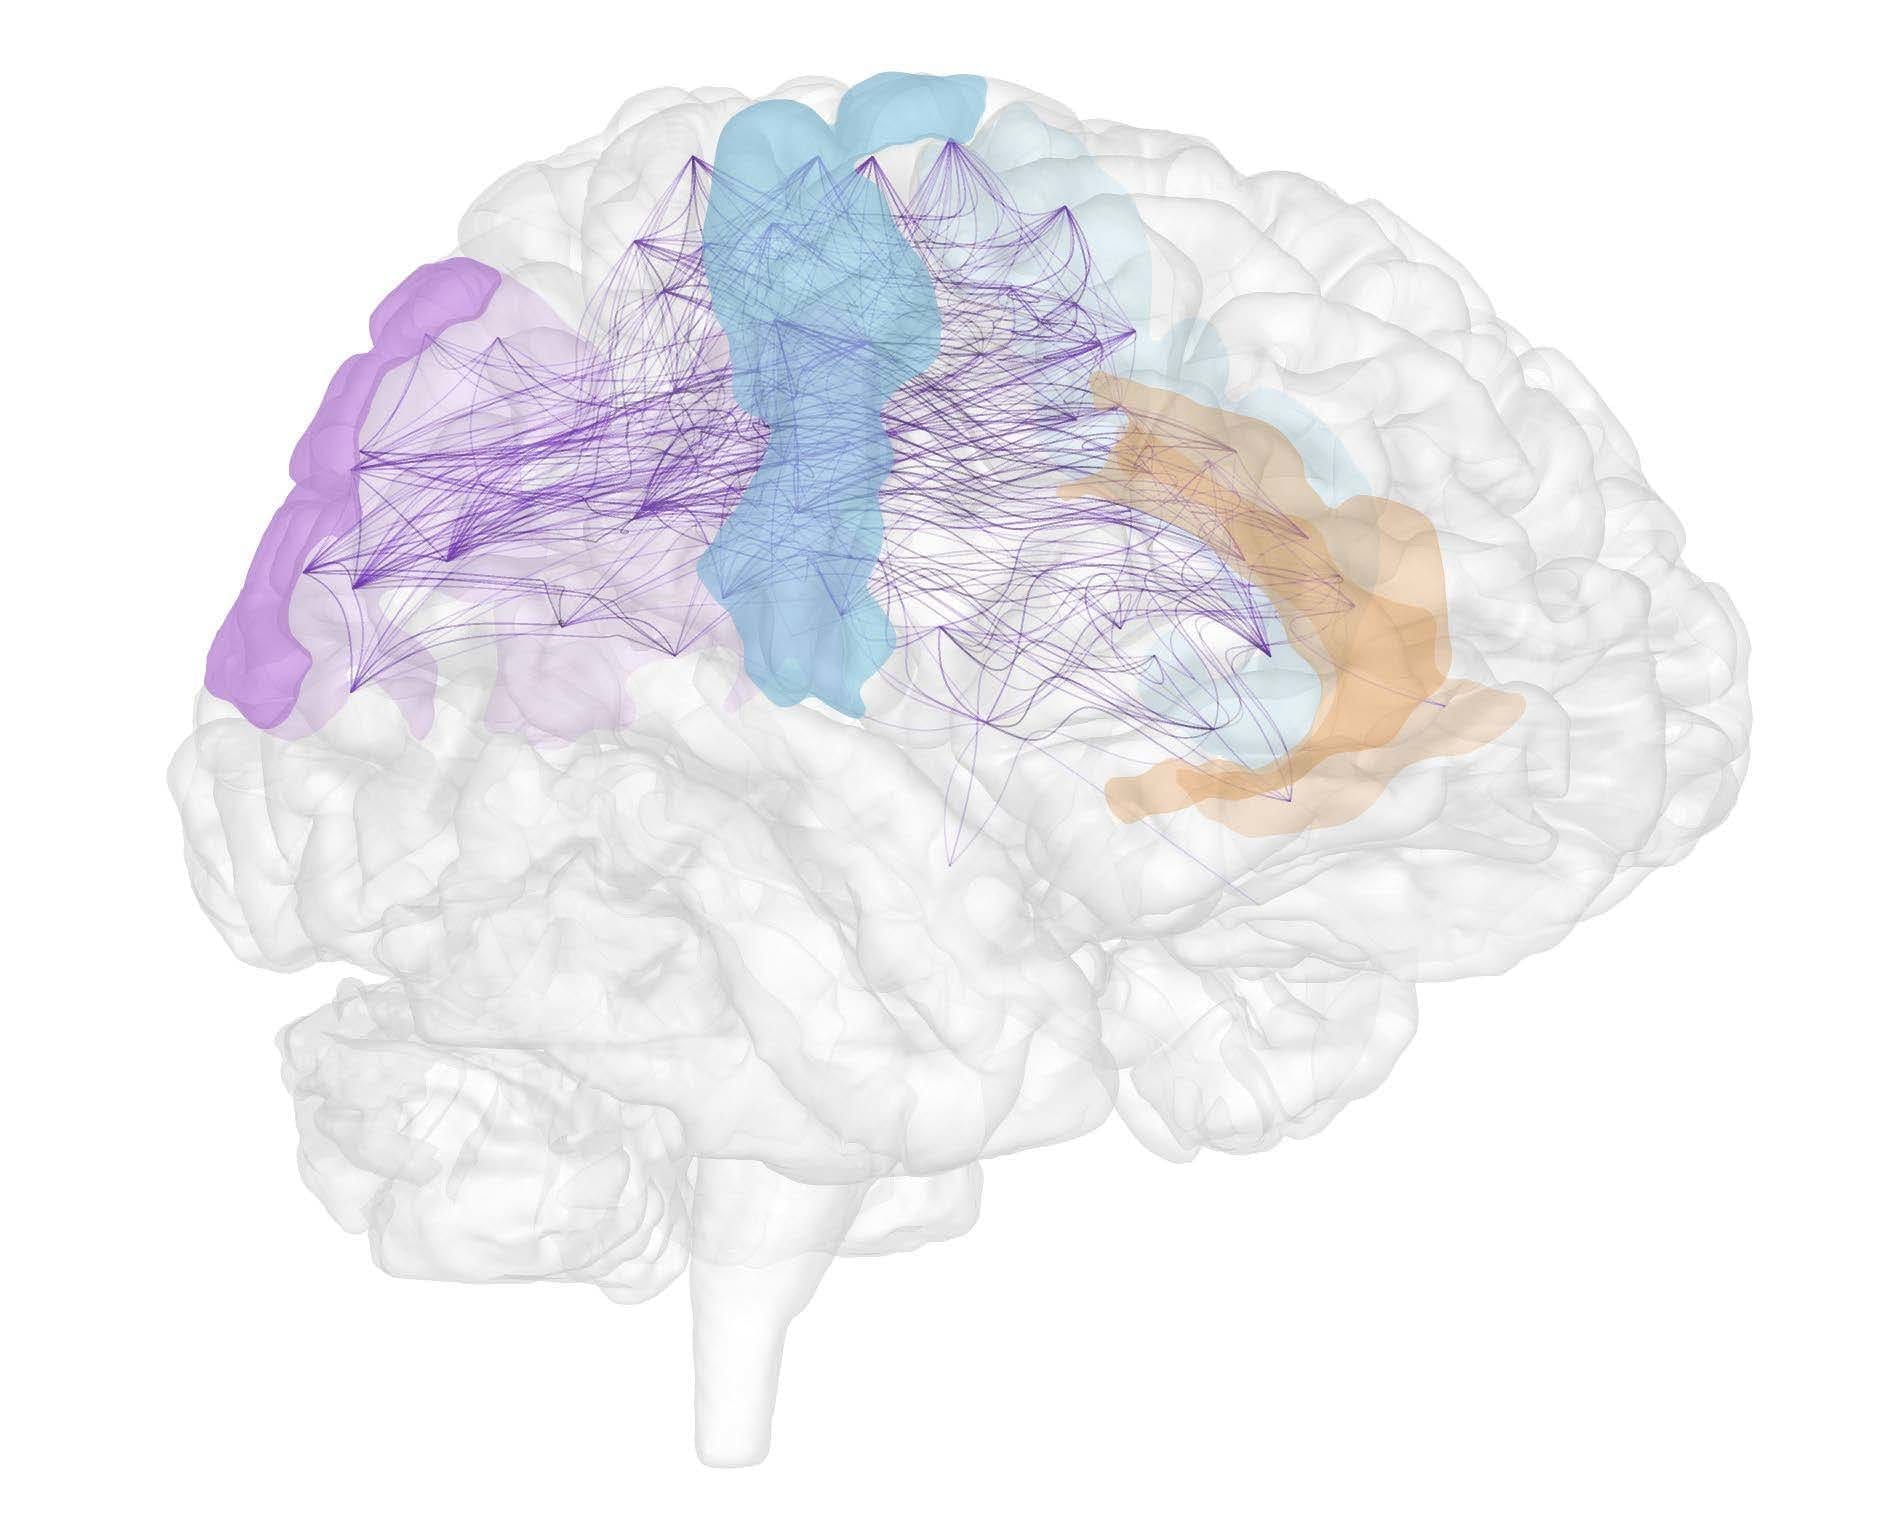 Mirror neurons located in the cingulate cortex could be a key to empathy and psychopathological disorders